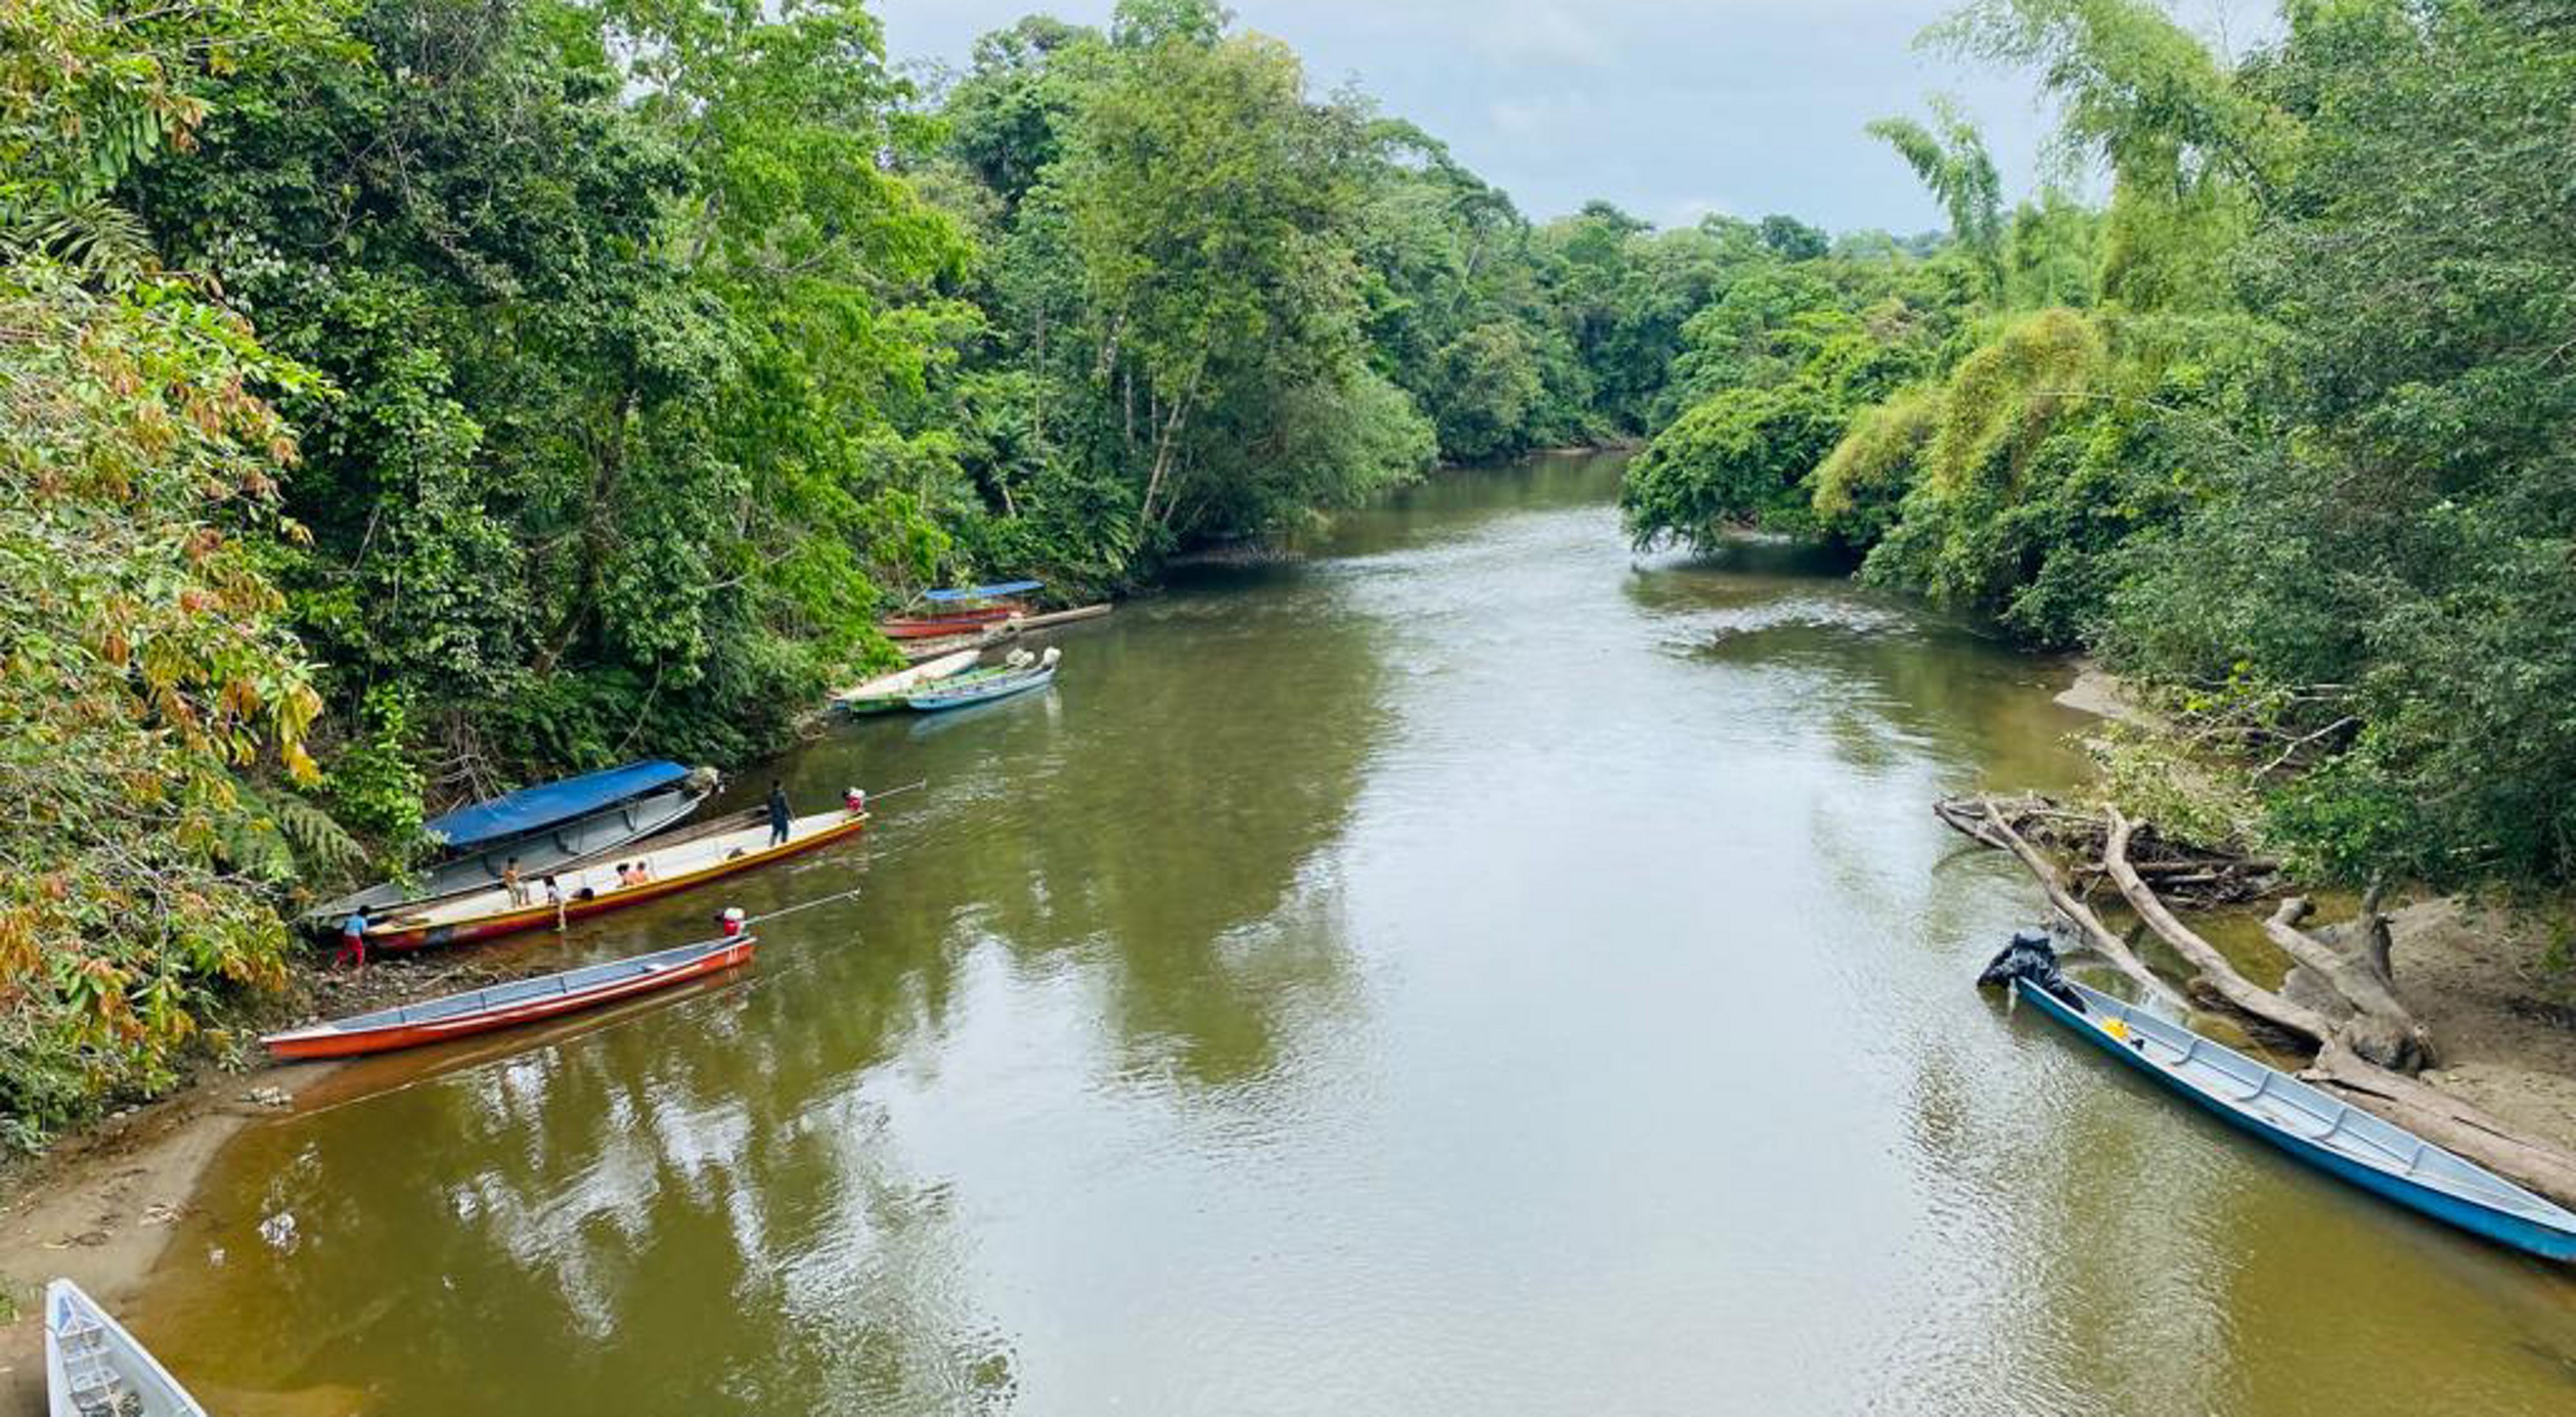 A river with small boats and green trees along both shores.